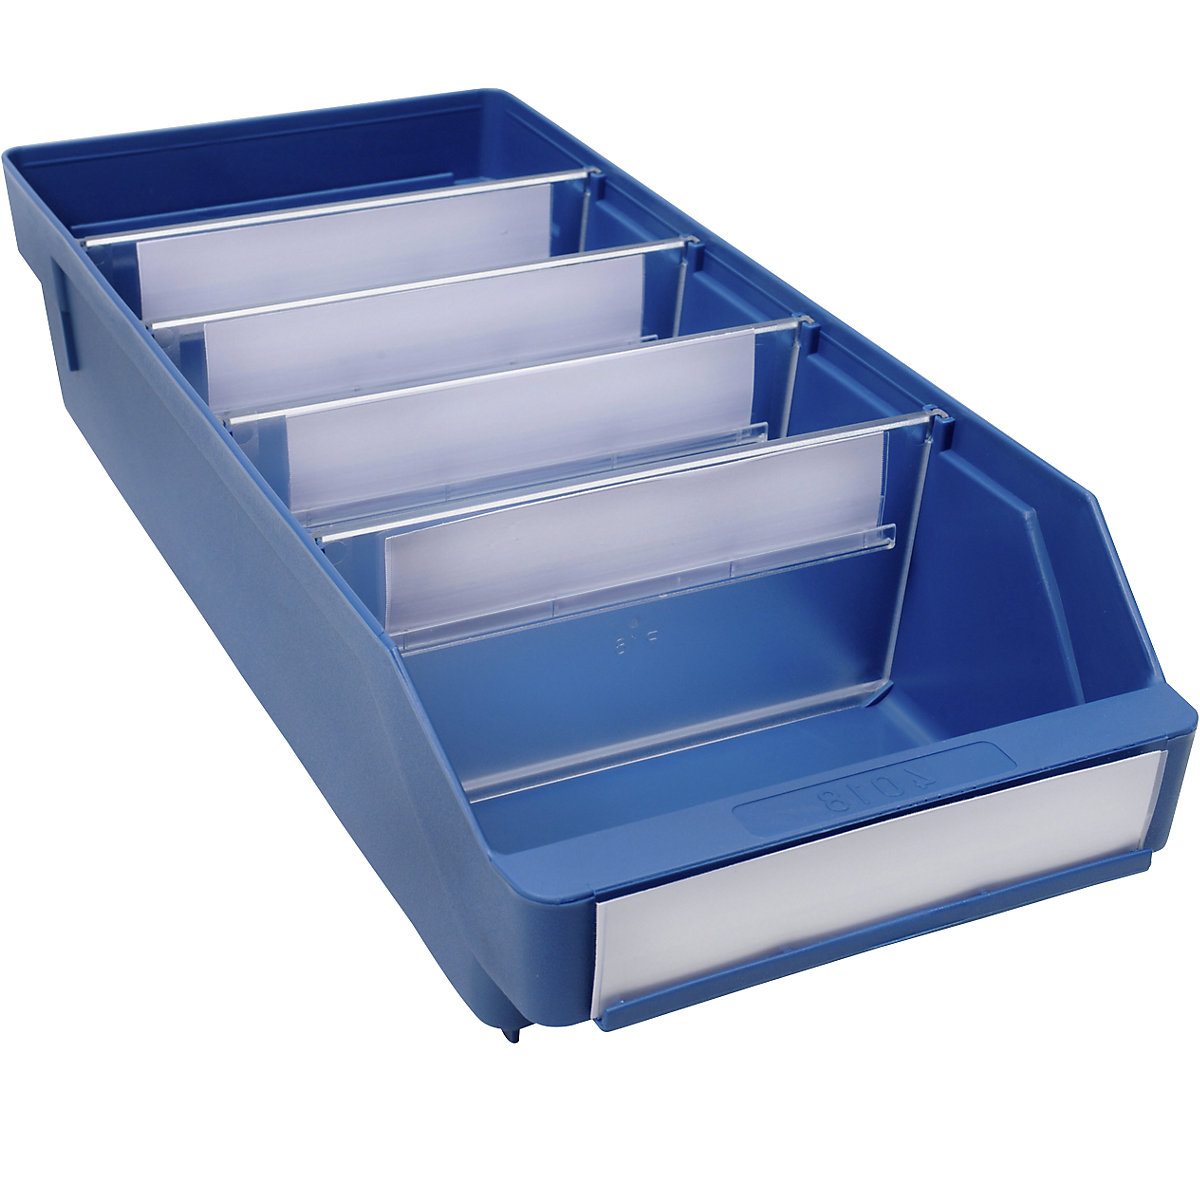 Shelf bin made of highly impact resistant polypropylene – STEMO, blue, LxWxH 400 x 180 x 95 mm, pack of 20-18